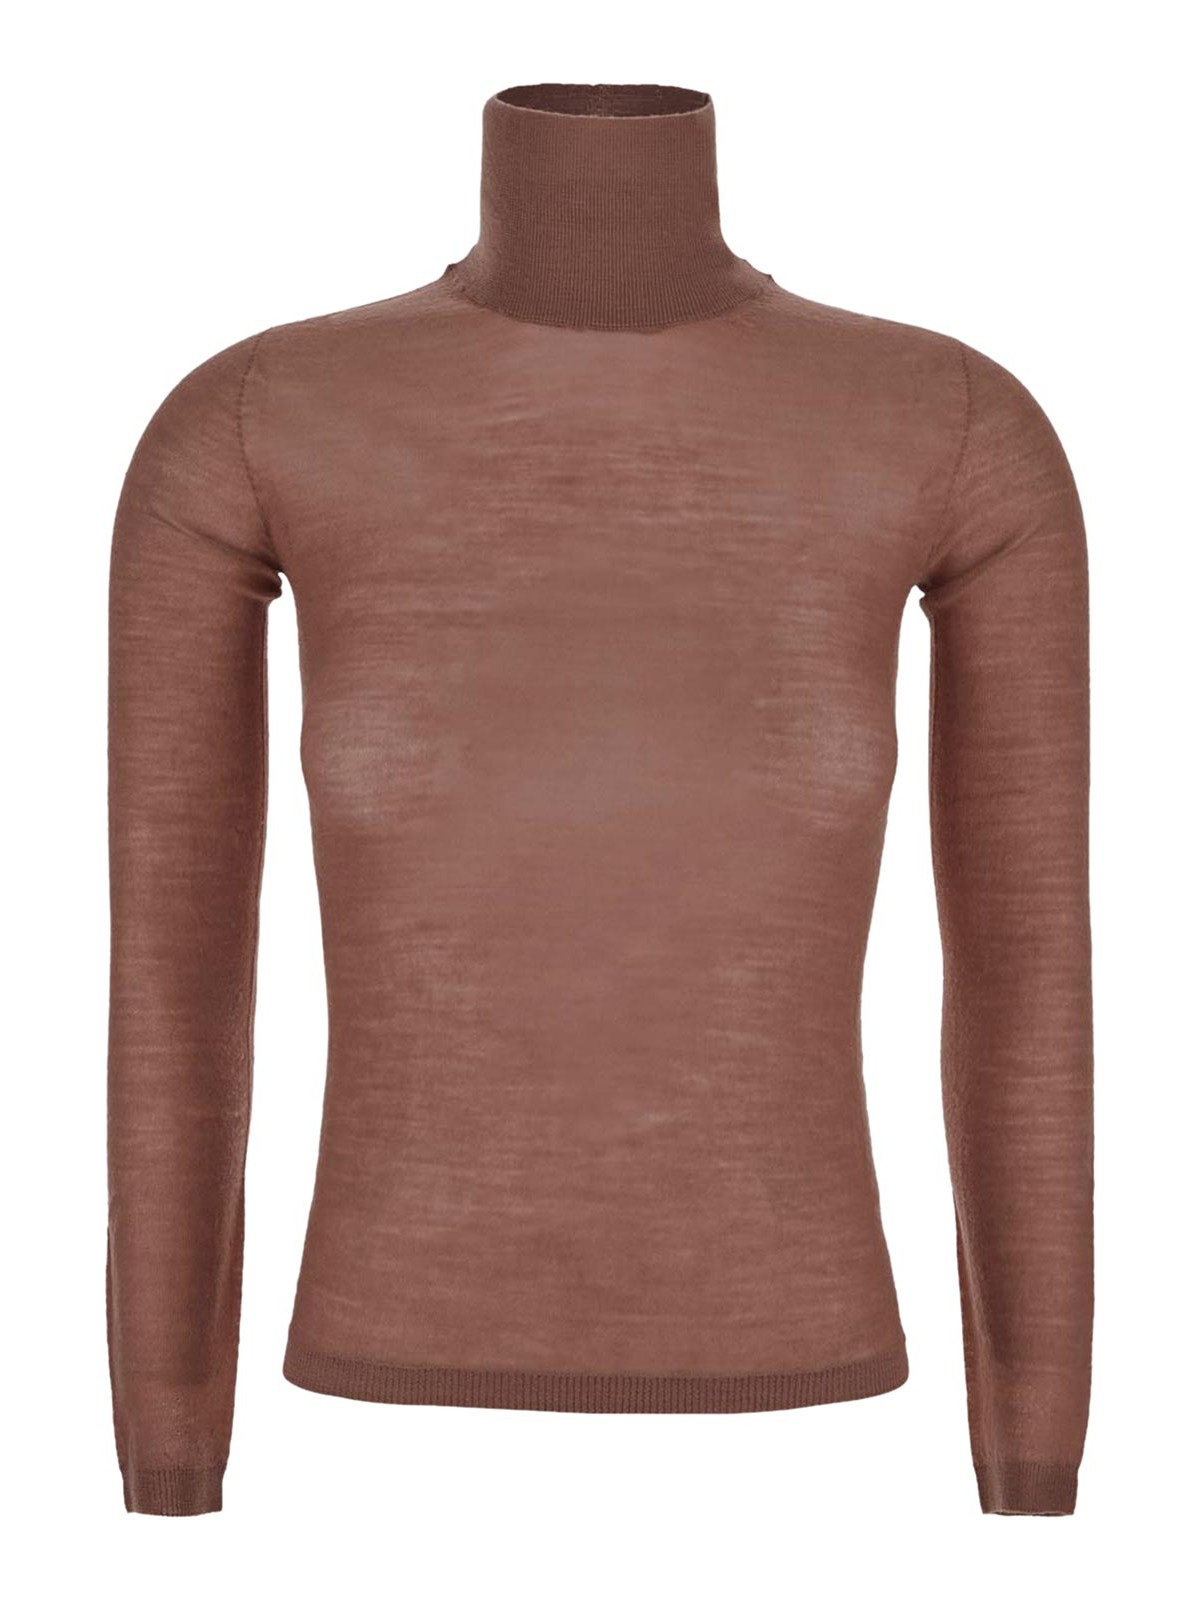 MAX MARA TOP IN GUAVA WITH TURTLENECK